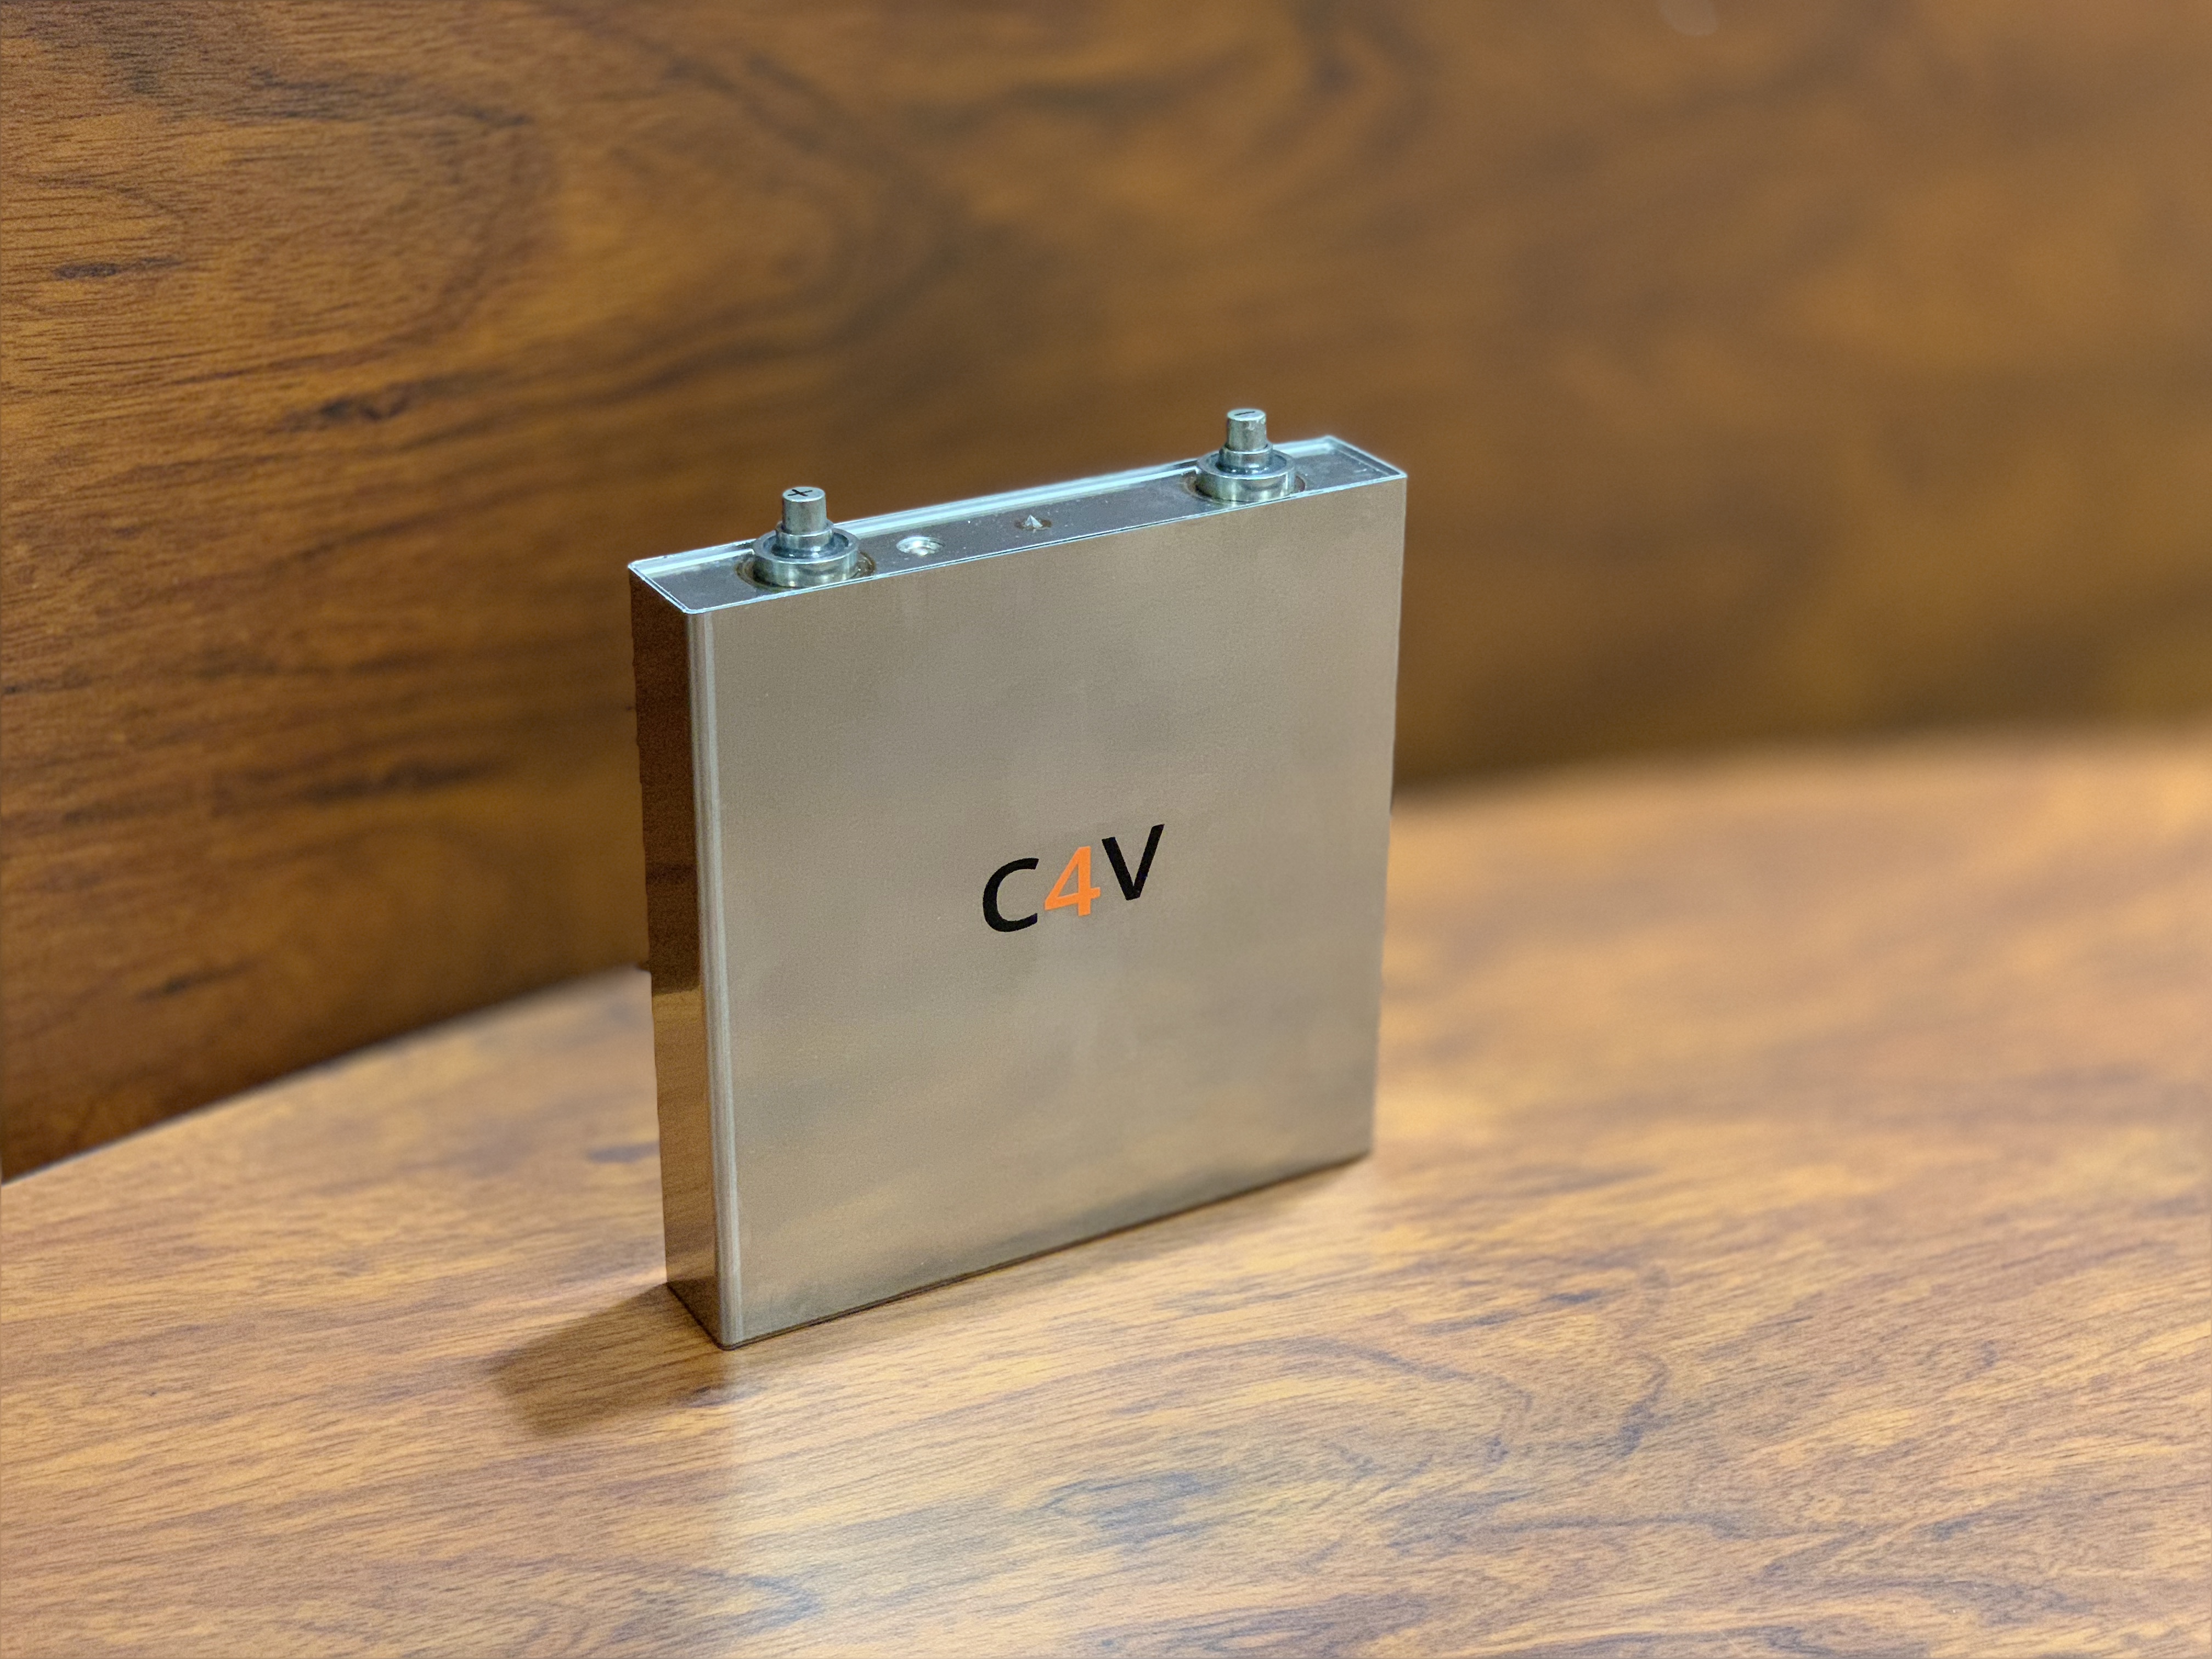 C4V's new solid state battery has arrived and is now on the road to